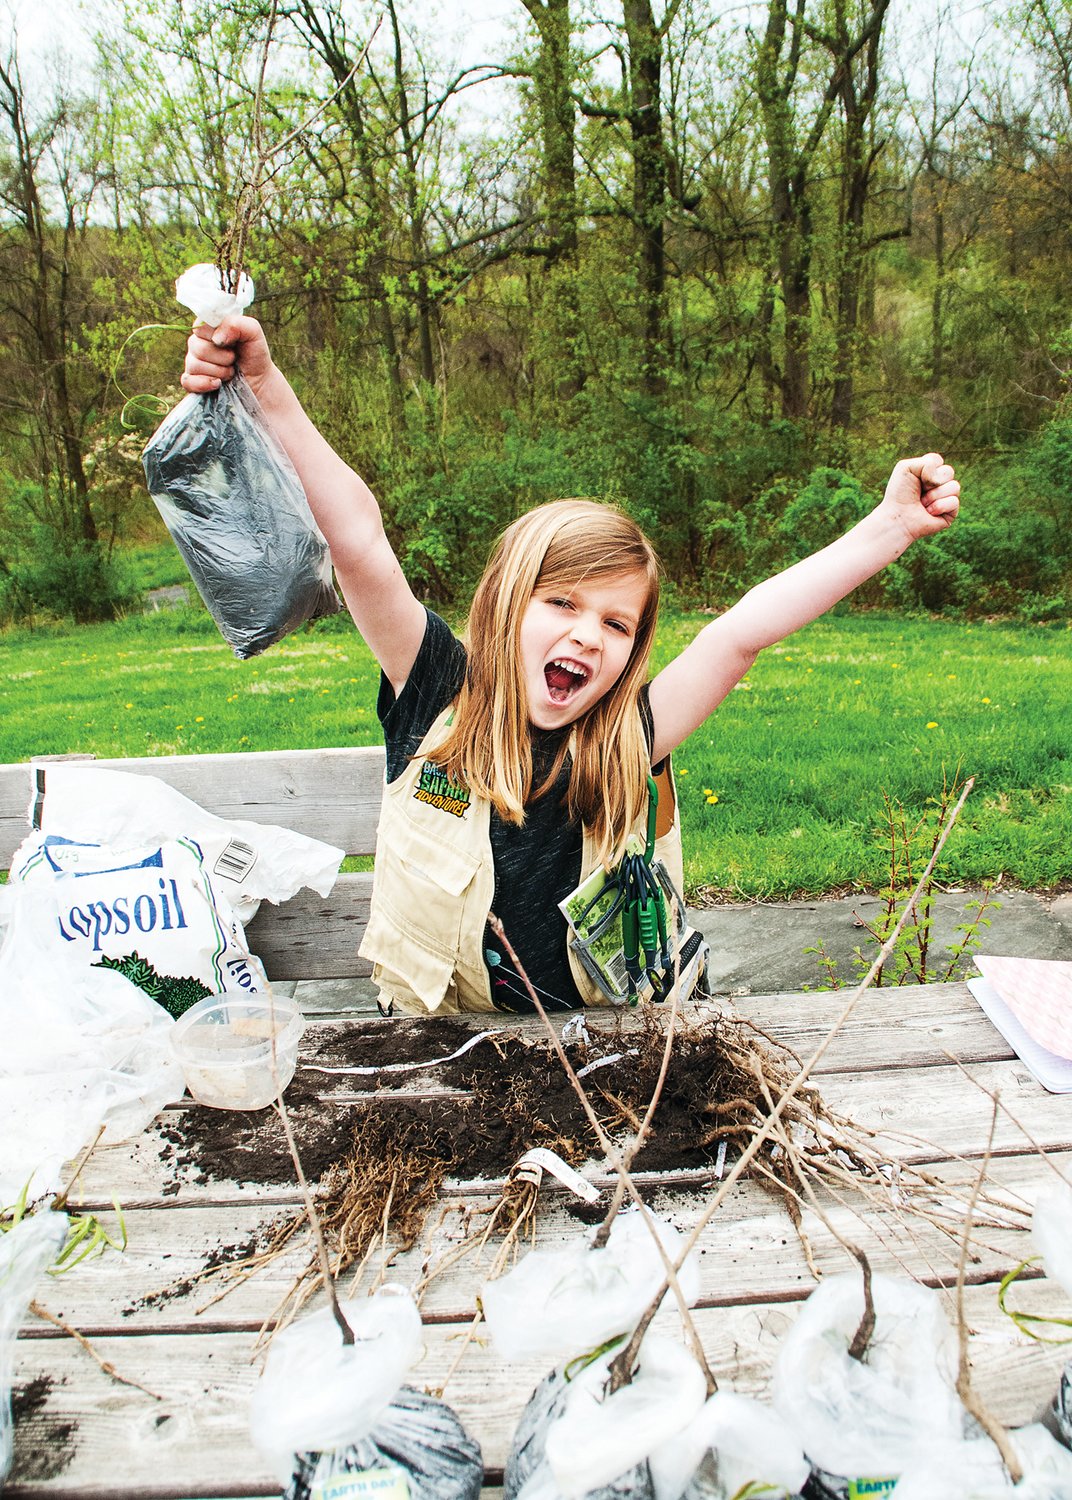 Clare Sheehan helped to create tree sapling give-aways at the Bucks Audubon’s Earth Day Festival in 2017. This year’s festival, scheduled for April 18, is one of many regional Earth Day activities designed to promote environmental awareness and protection. Photograph by Marissa Jacobs.